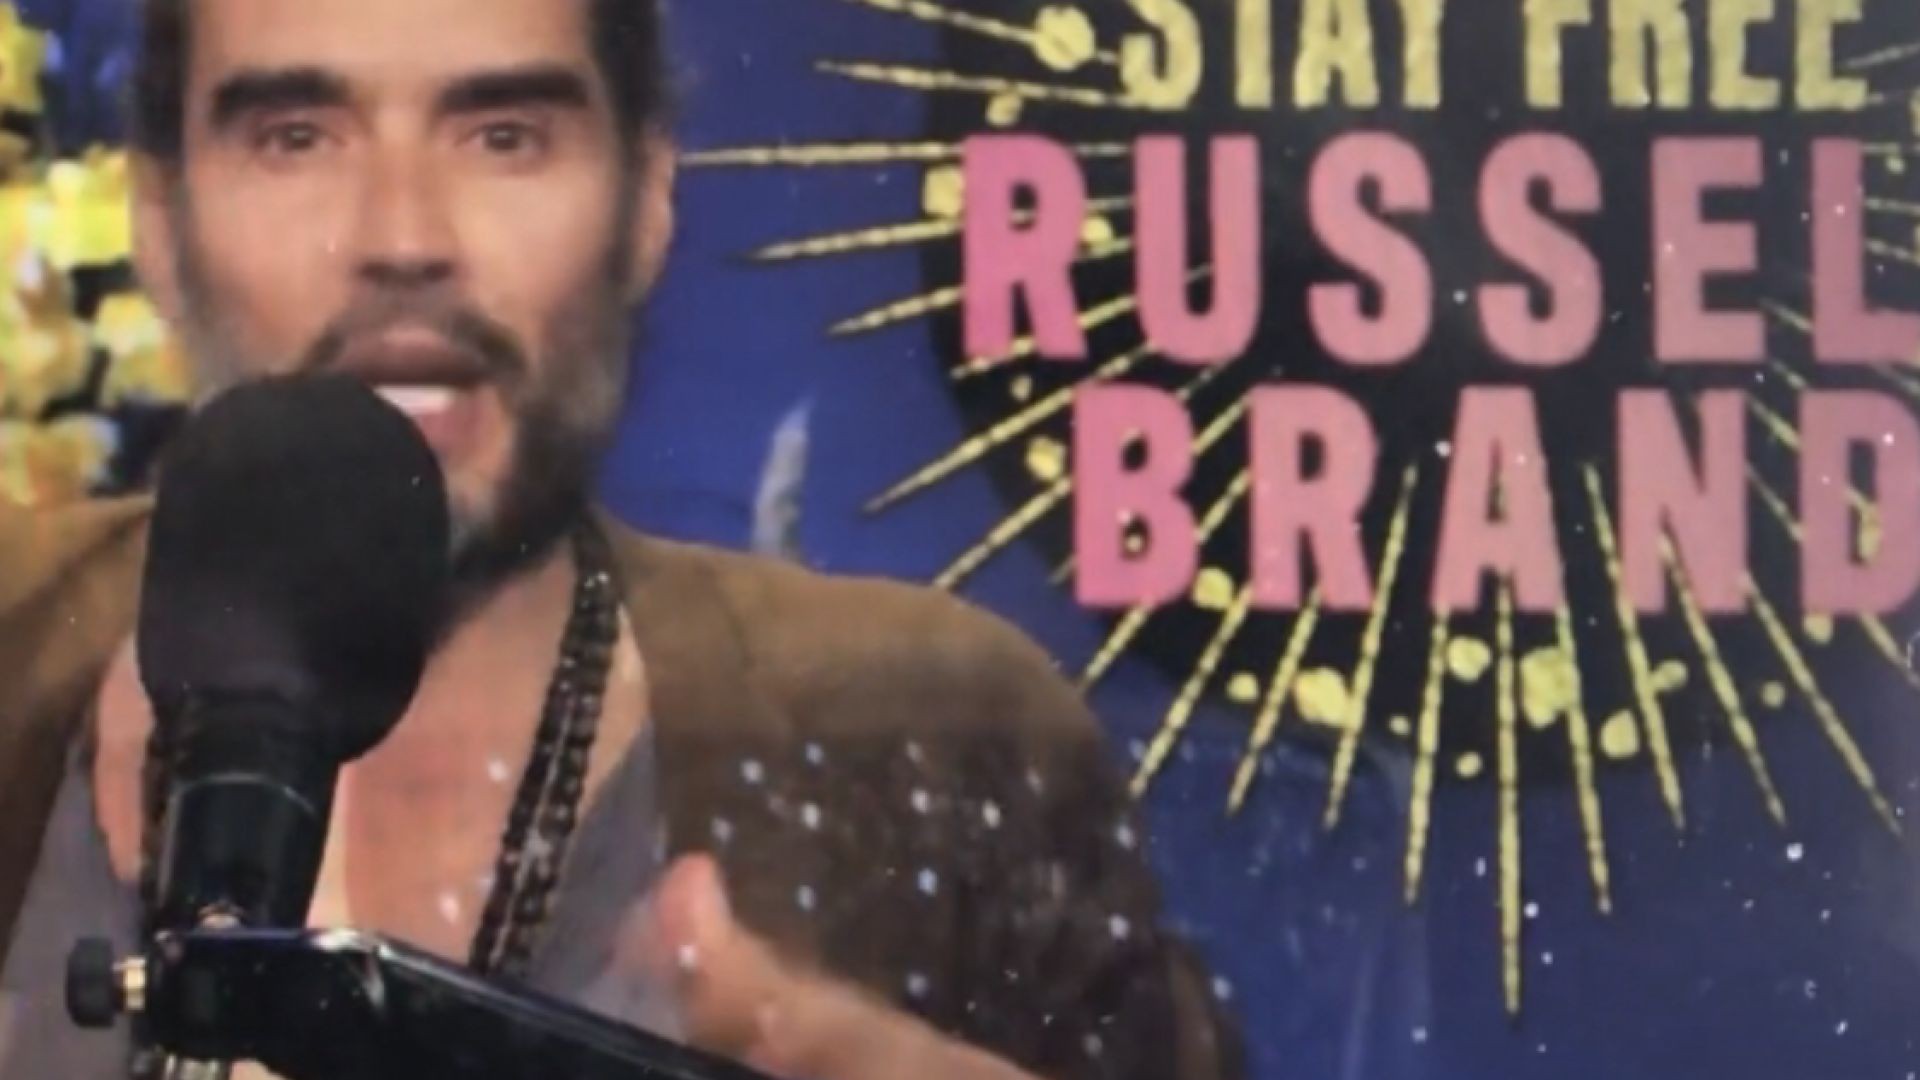 Russell Brand examines Capitol Hill hearing on Covid19 Vaccine Prices (link below)